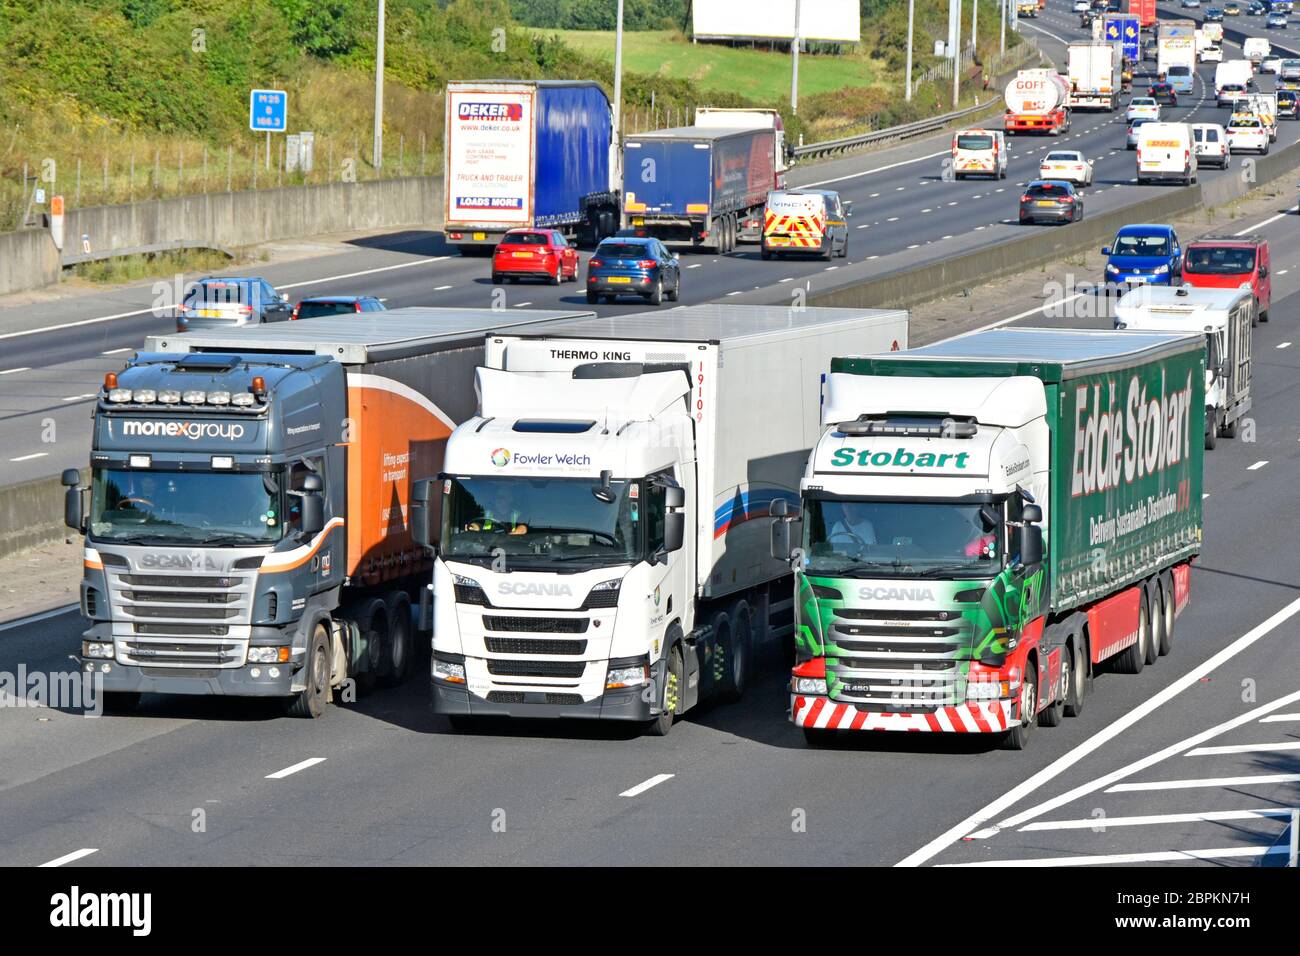 Drivers in cabs of supply chain haulage hgv lorry truck articulated trailer overtaking in traffic lorries trucks busy four lane motorway England UK Stock Photo